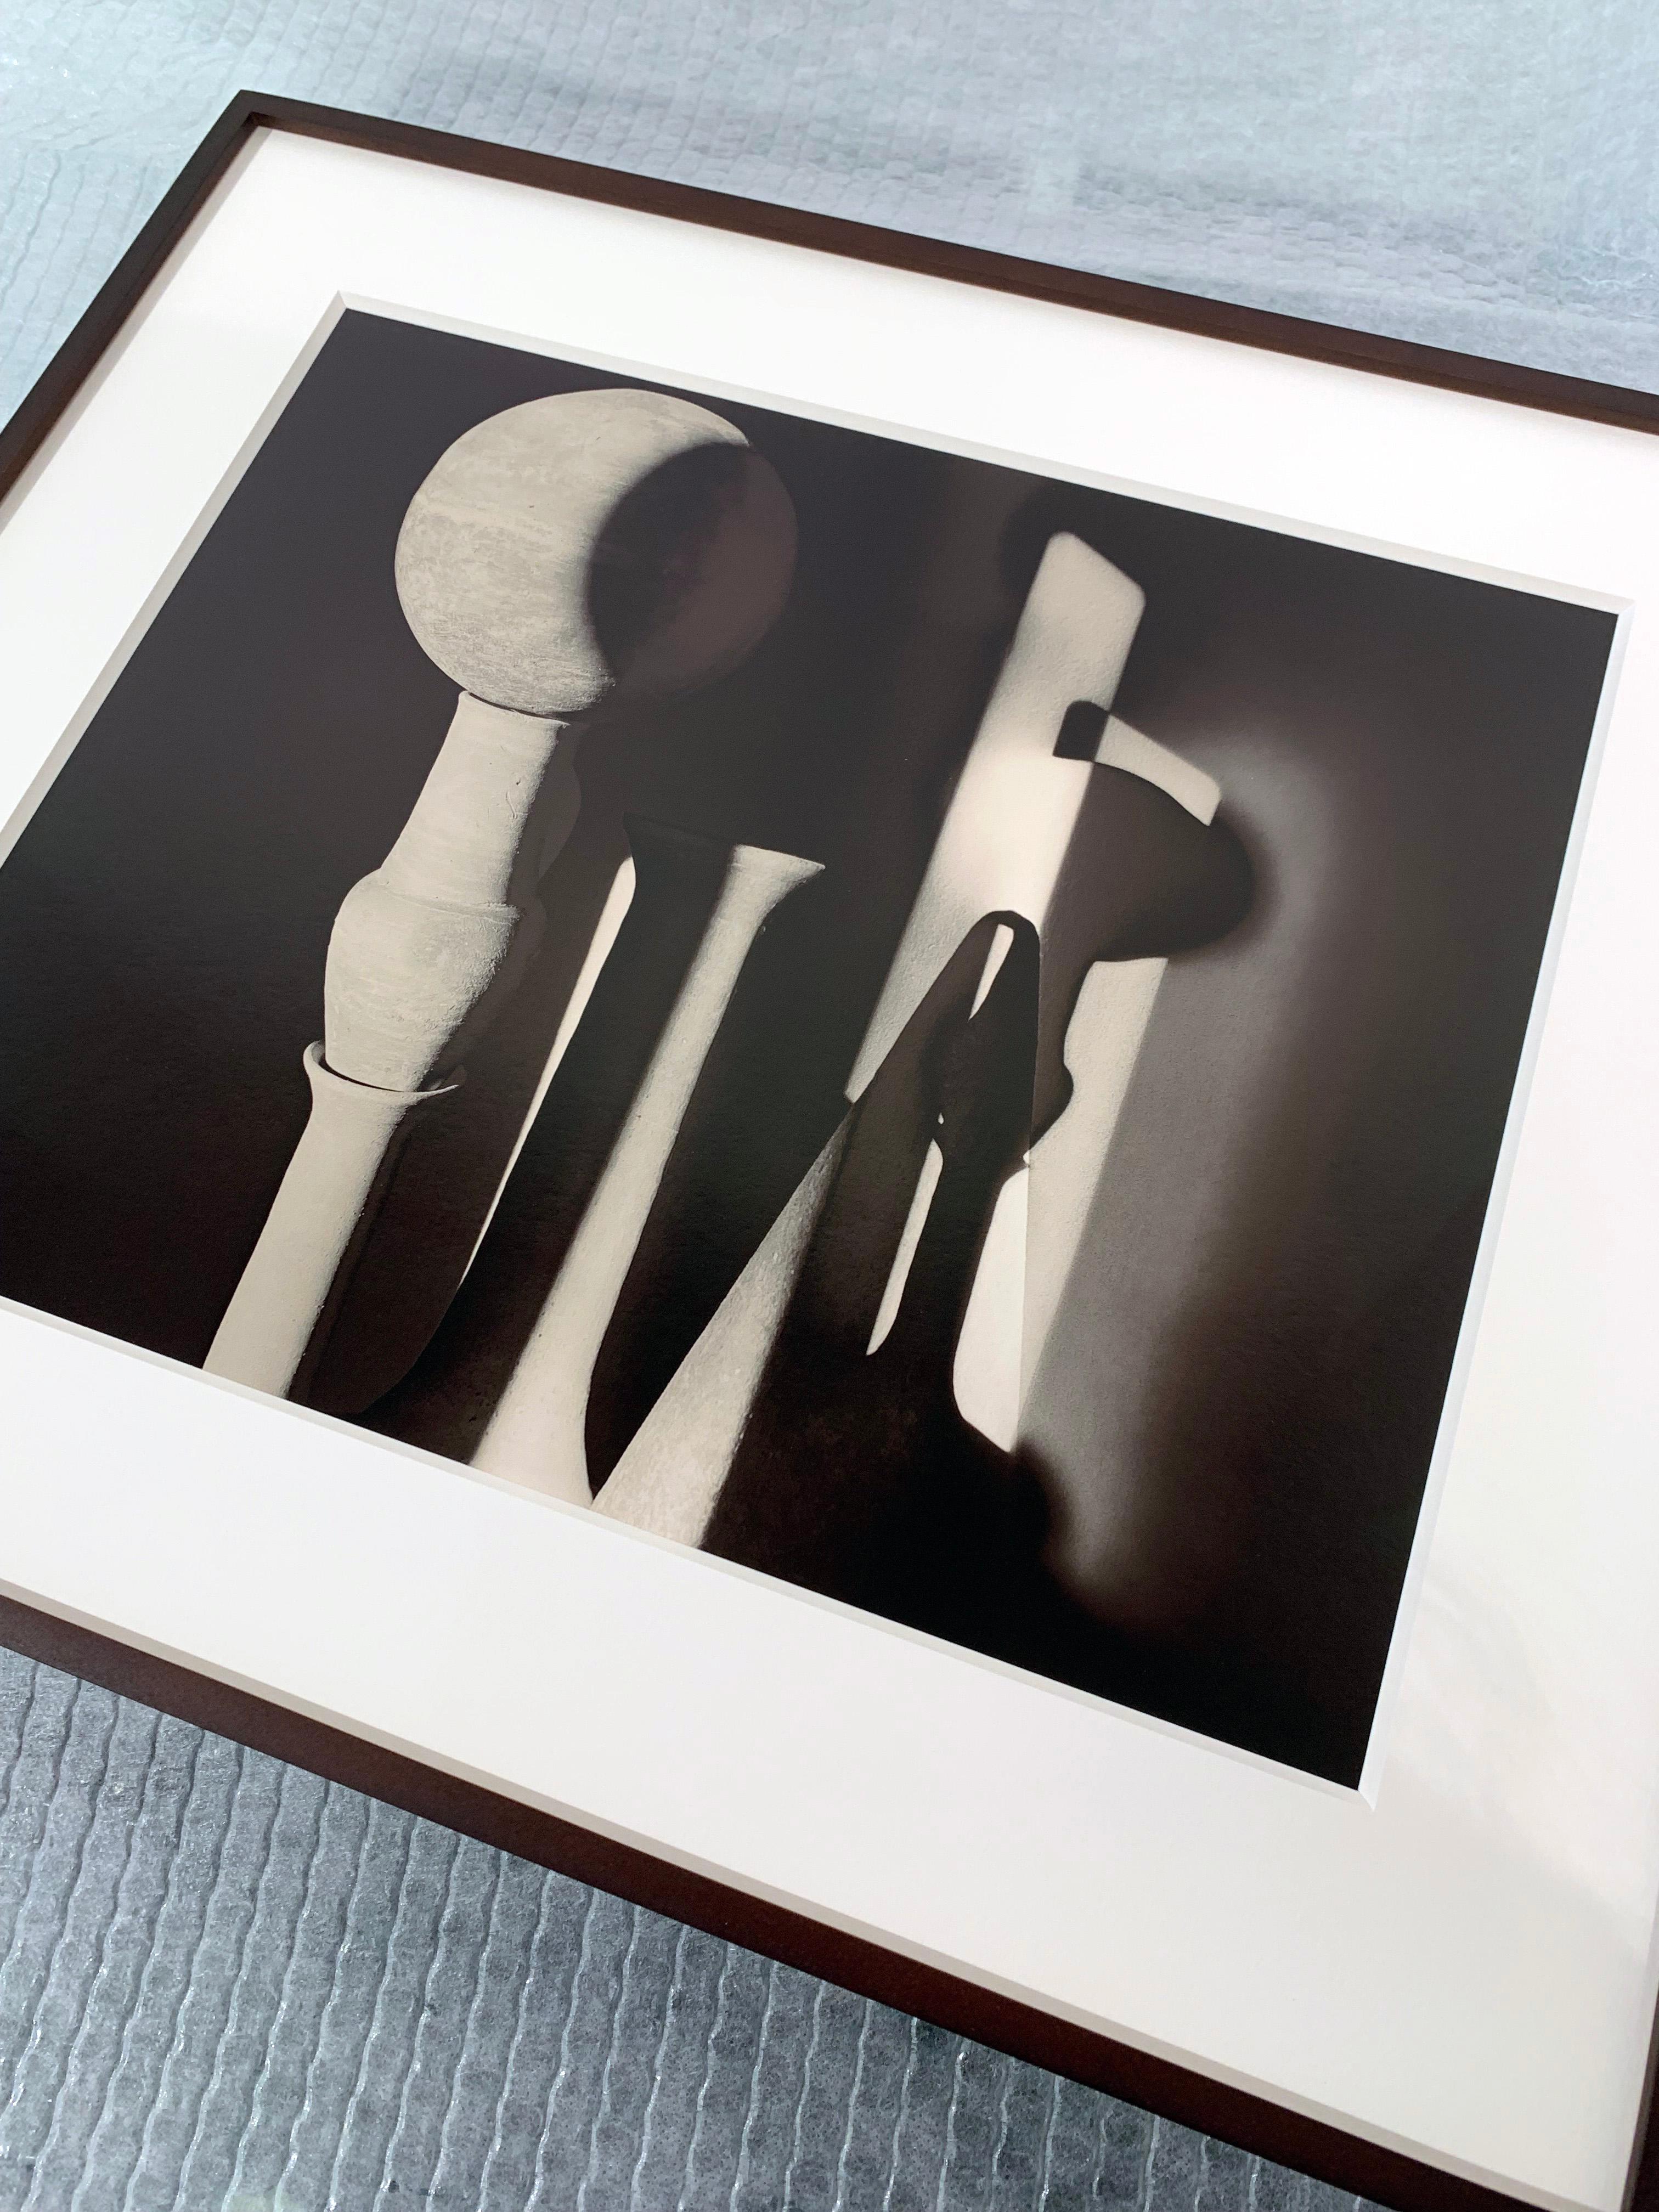 In Between the Shadows 3
Giclee Print on Hahnemuhle Pearl Fine Art Paper
Print Size: 37x 30cm , Framed: 44 x 37 cm
Edition of 7 + 2 AP, Currently available of the edition: 5-7

The series ‘In Between the Shadows’ consists of structural and geometric